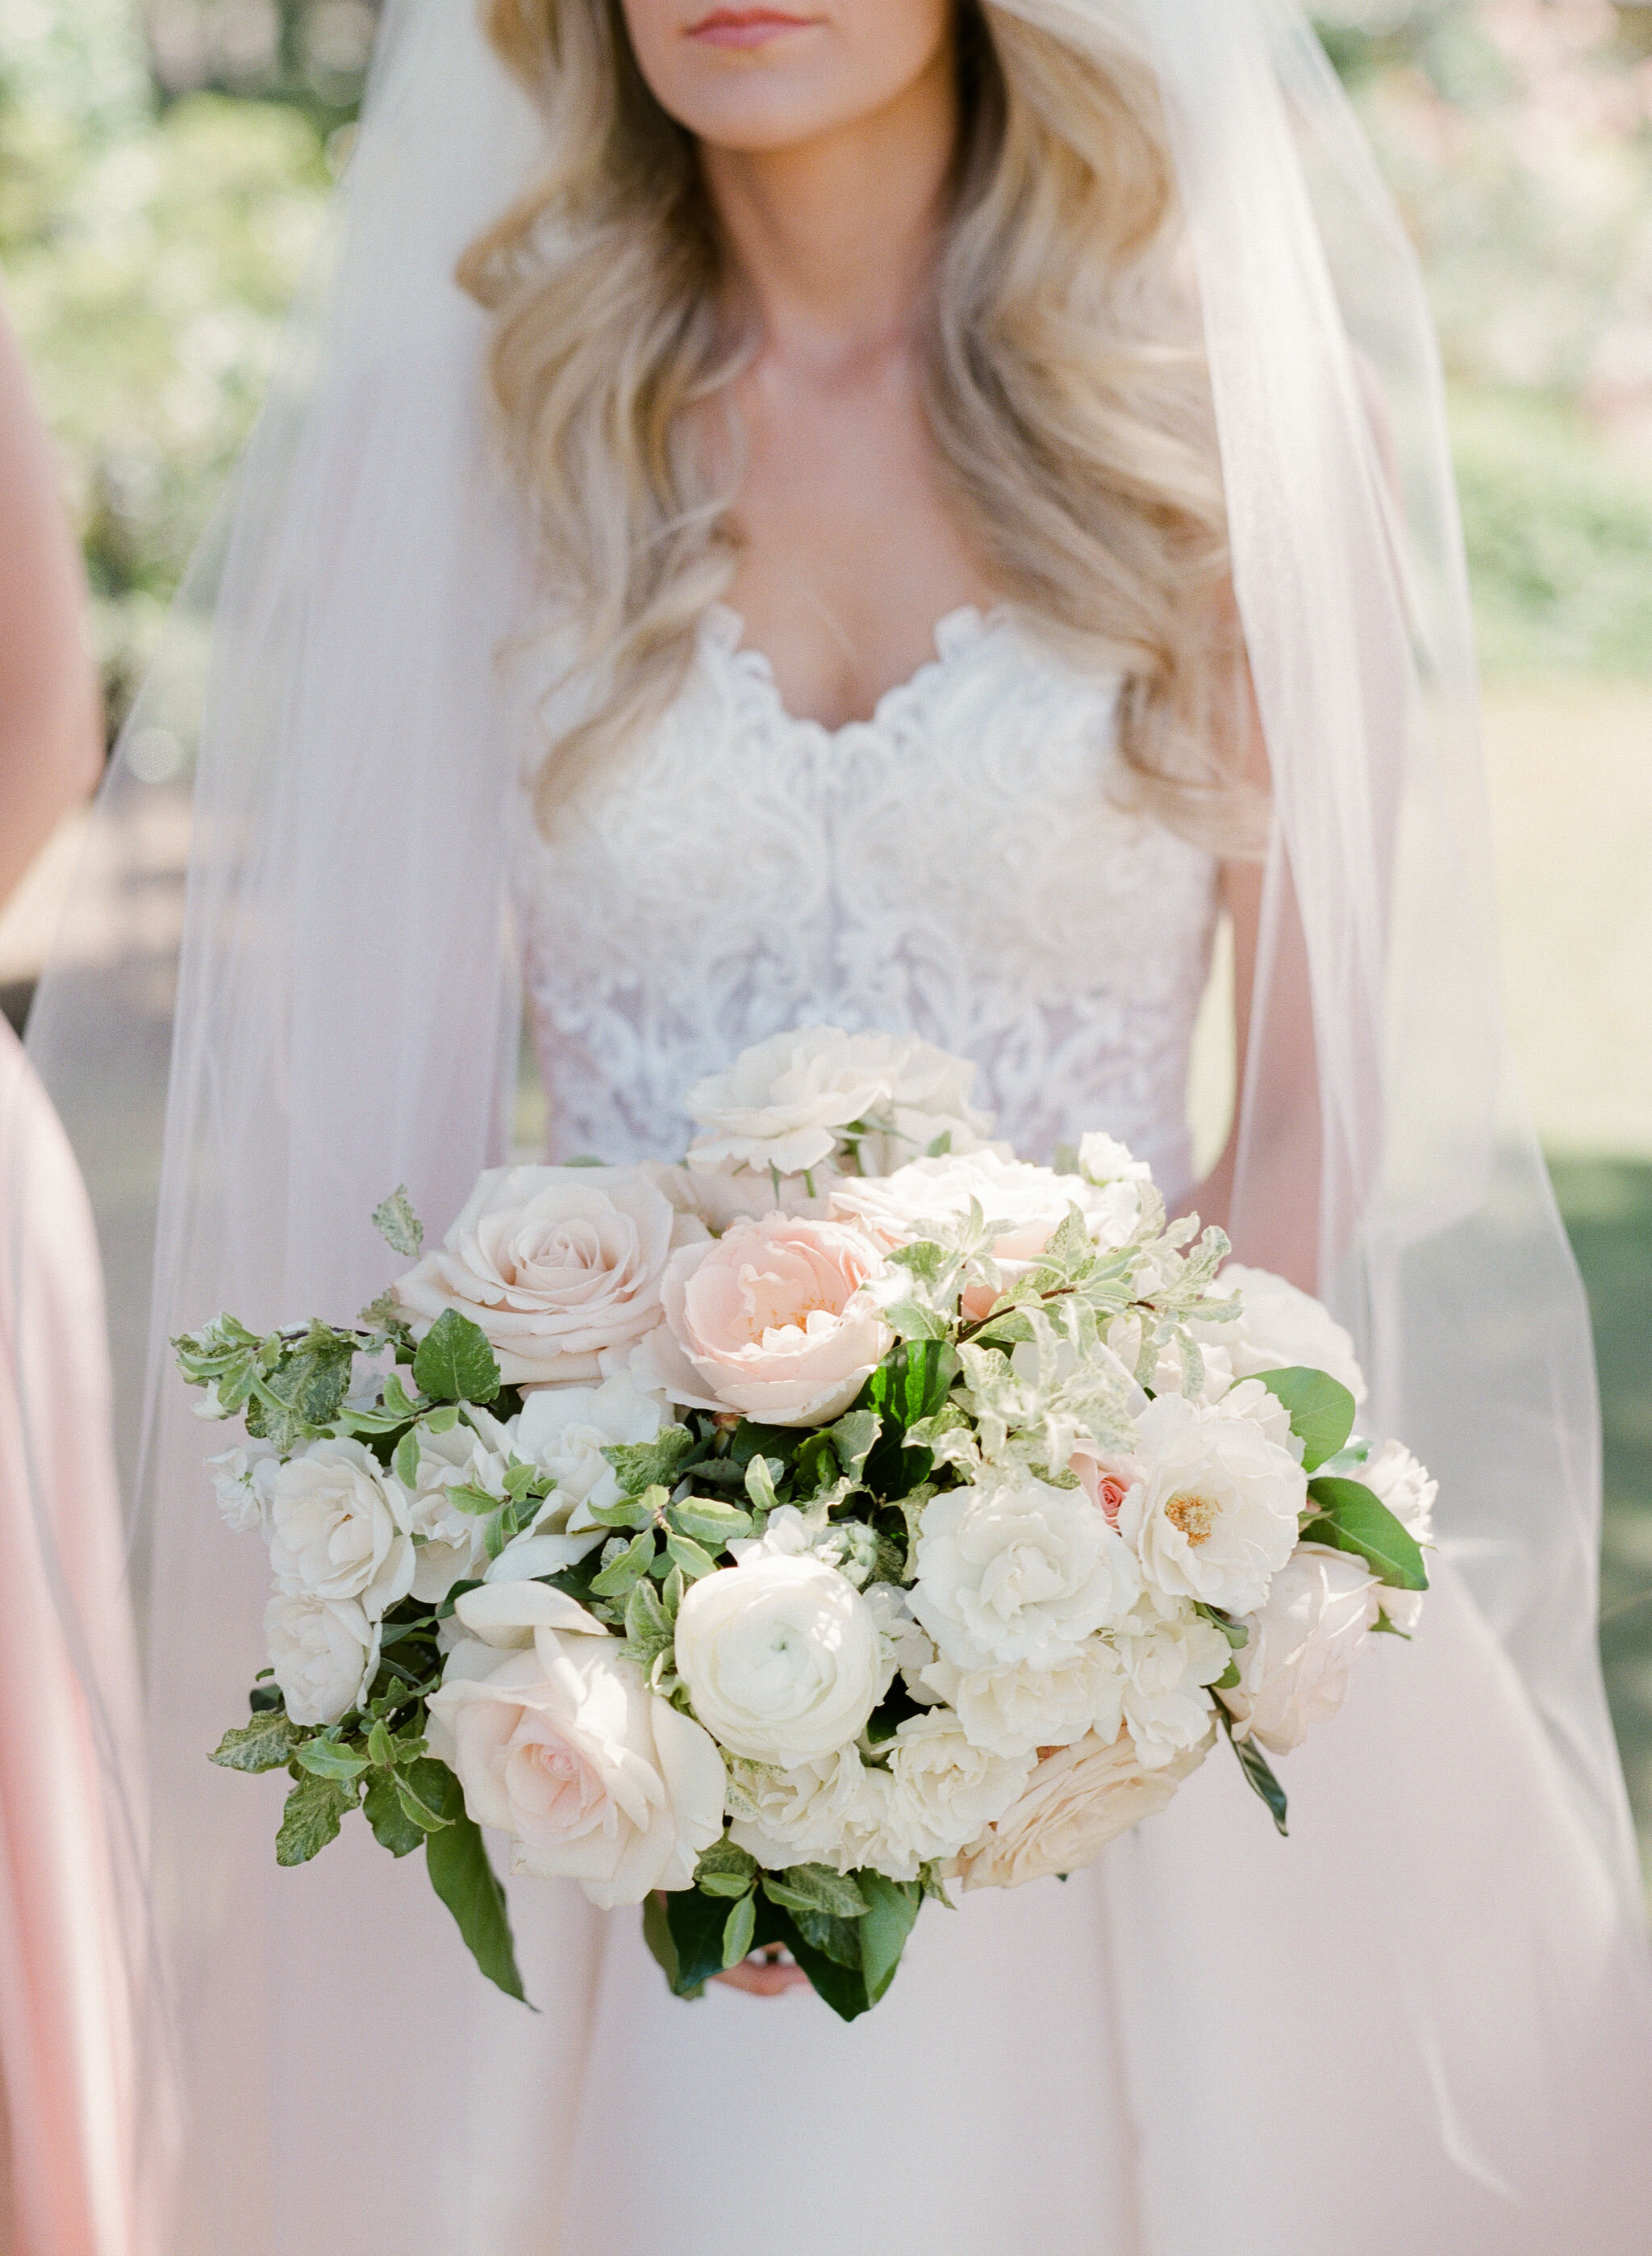 Neutral Bridal Bouquet Flowers with Garden Roses.JPG